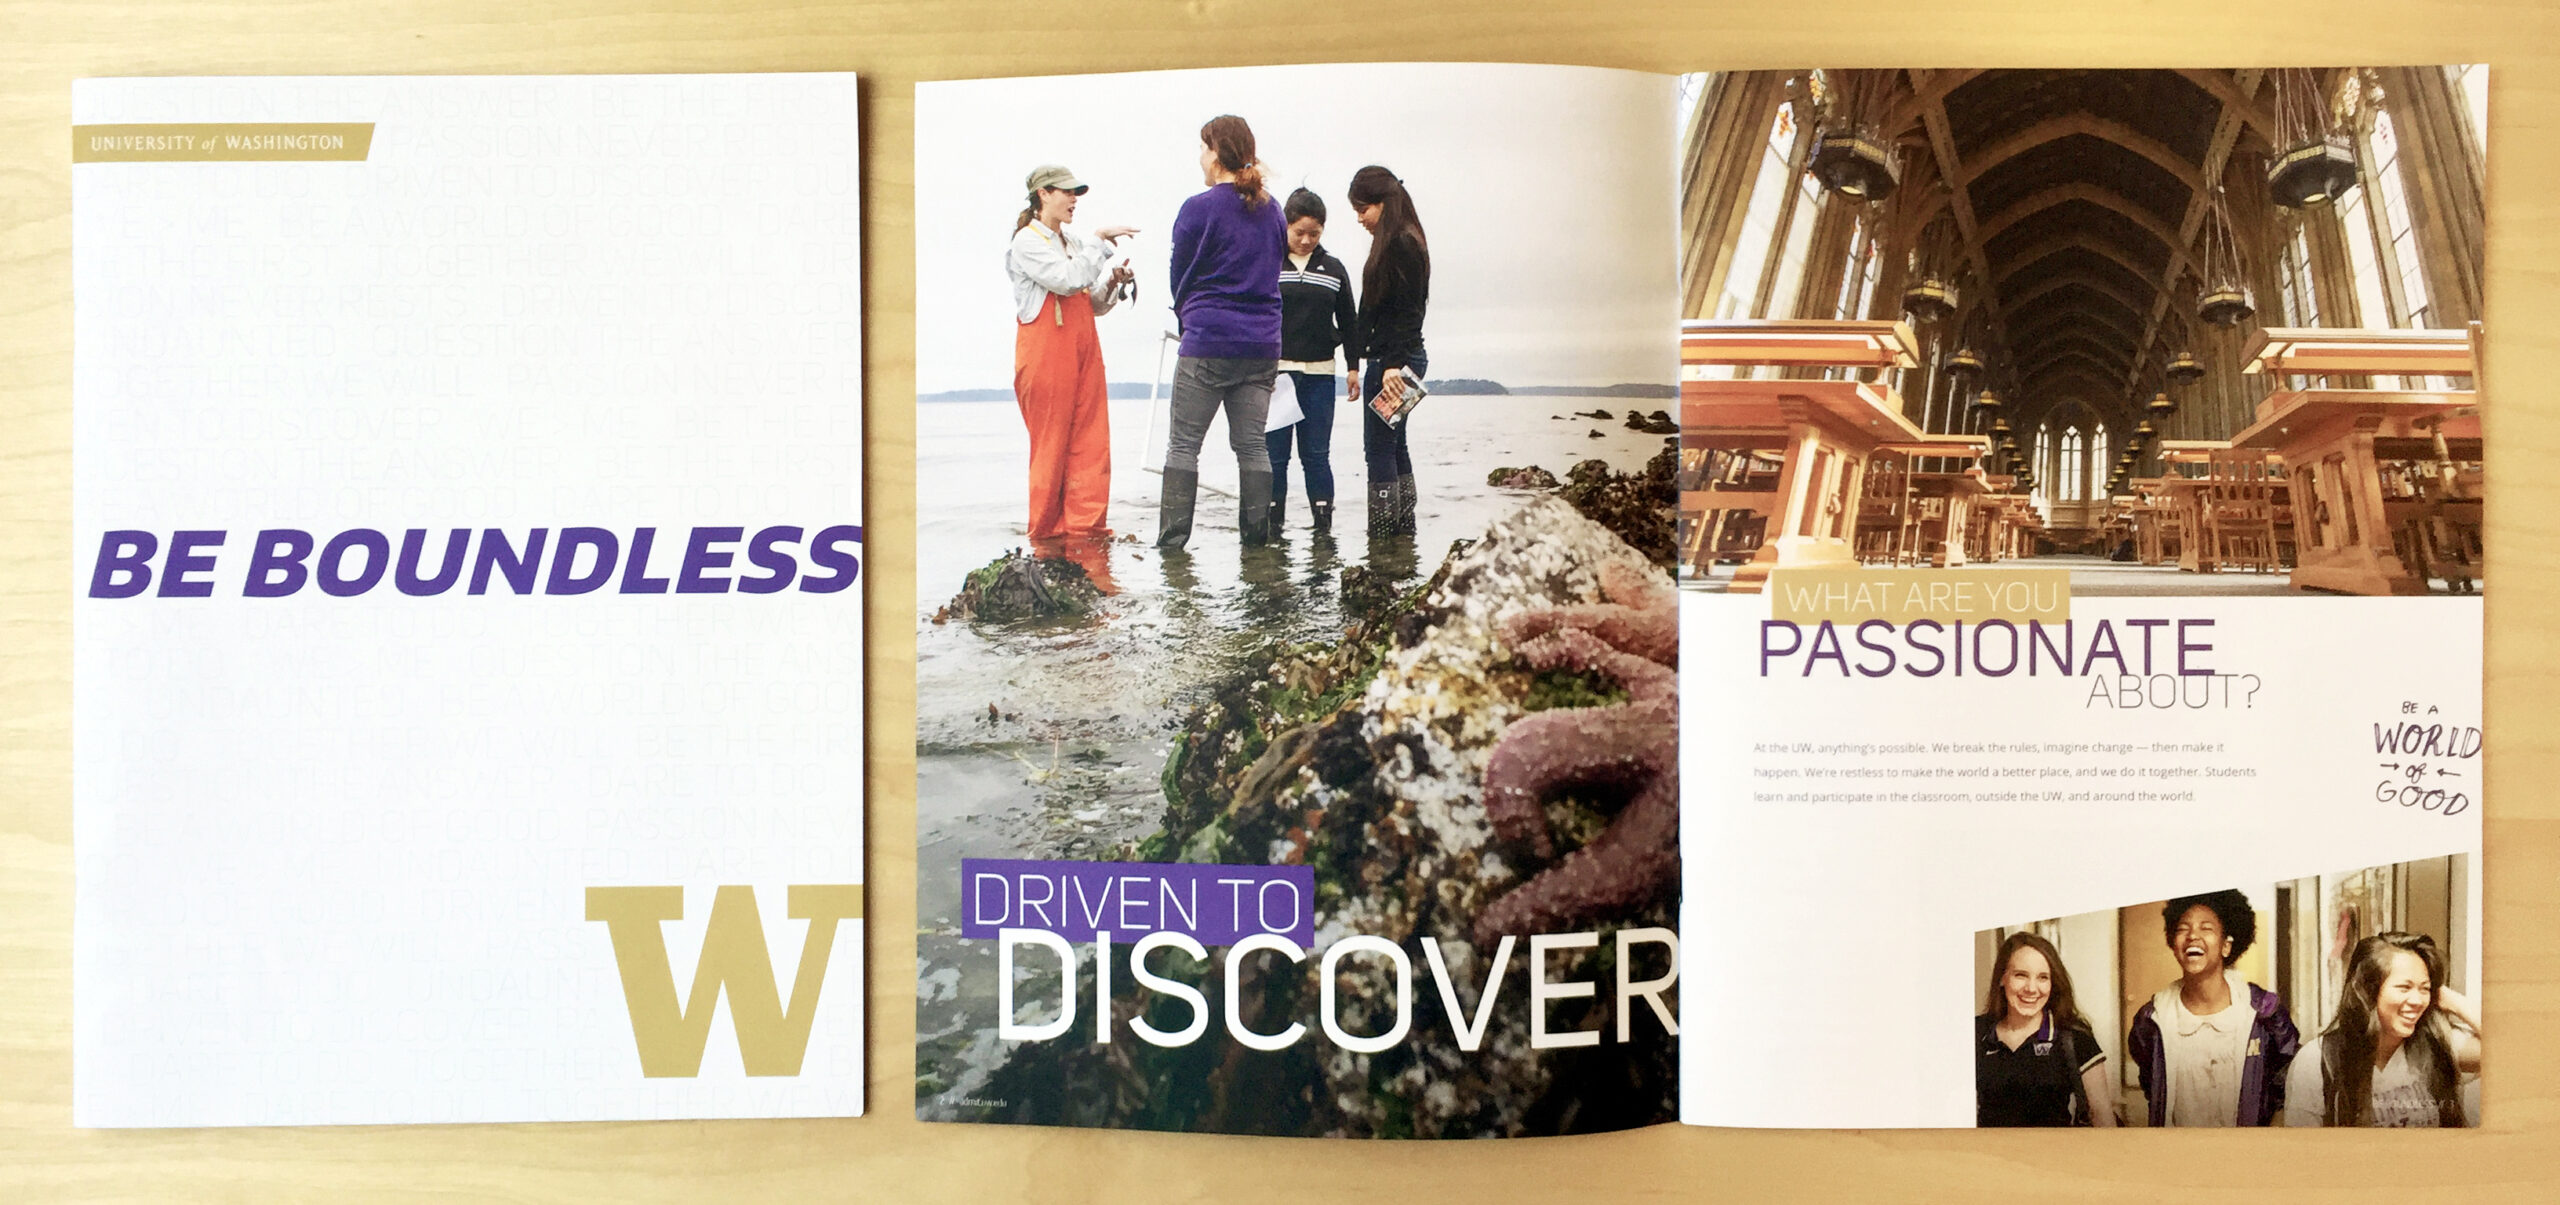 UW Admissions viewbook design cover & interior page design layouts